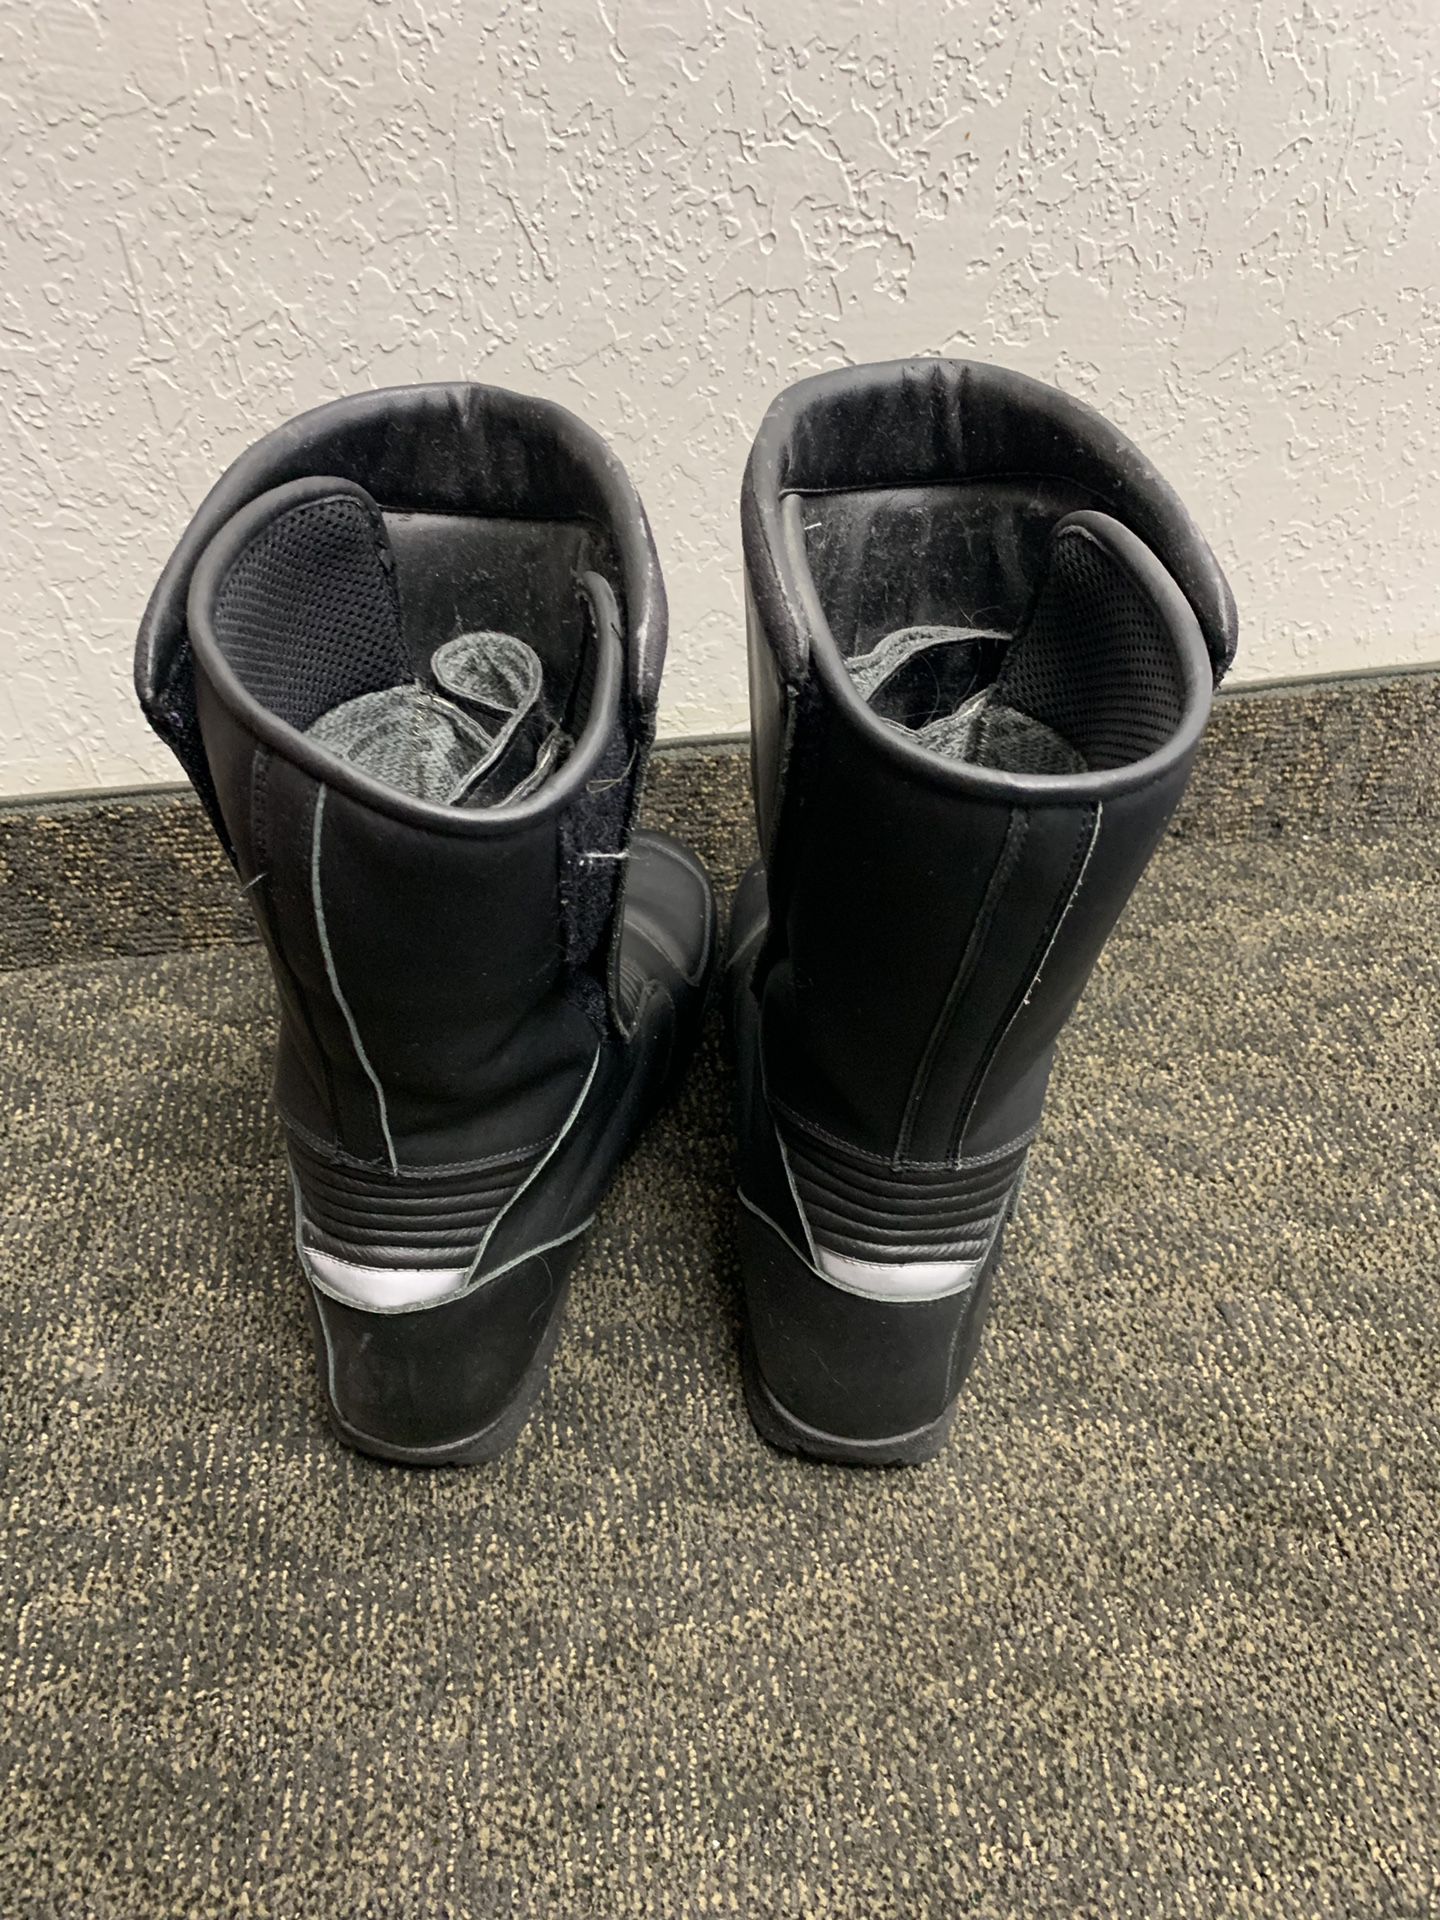 BMW Motorcycle boots size 46- size 11.5-12